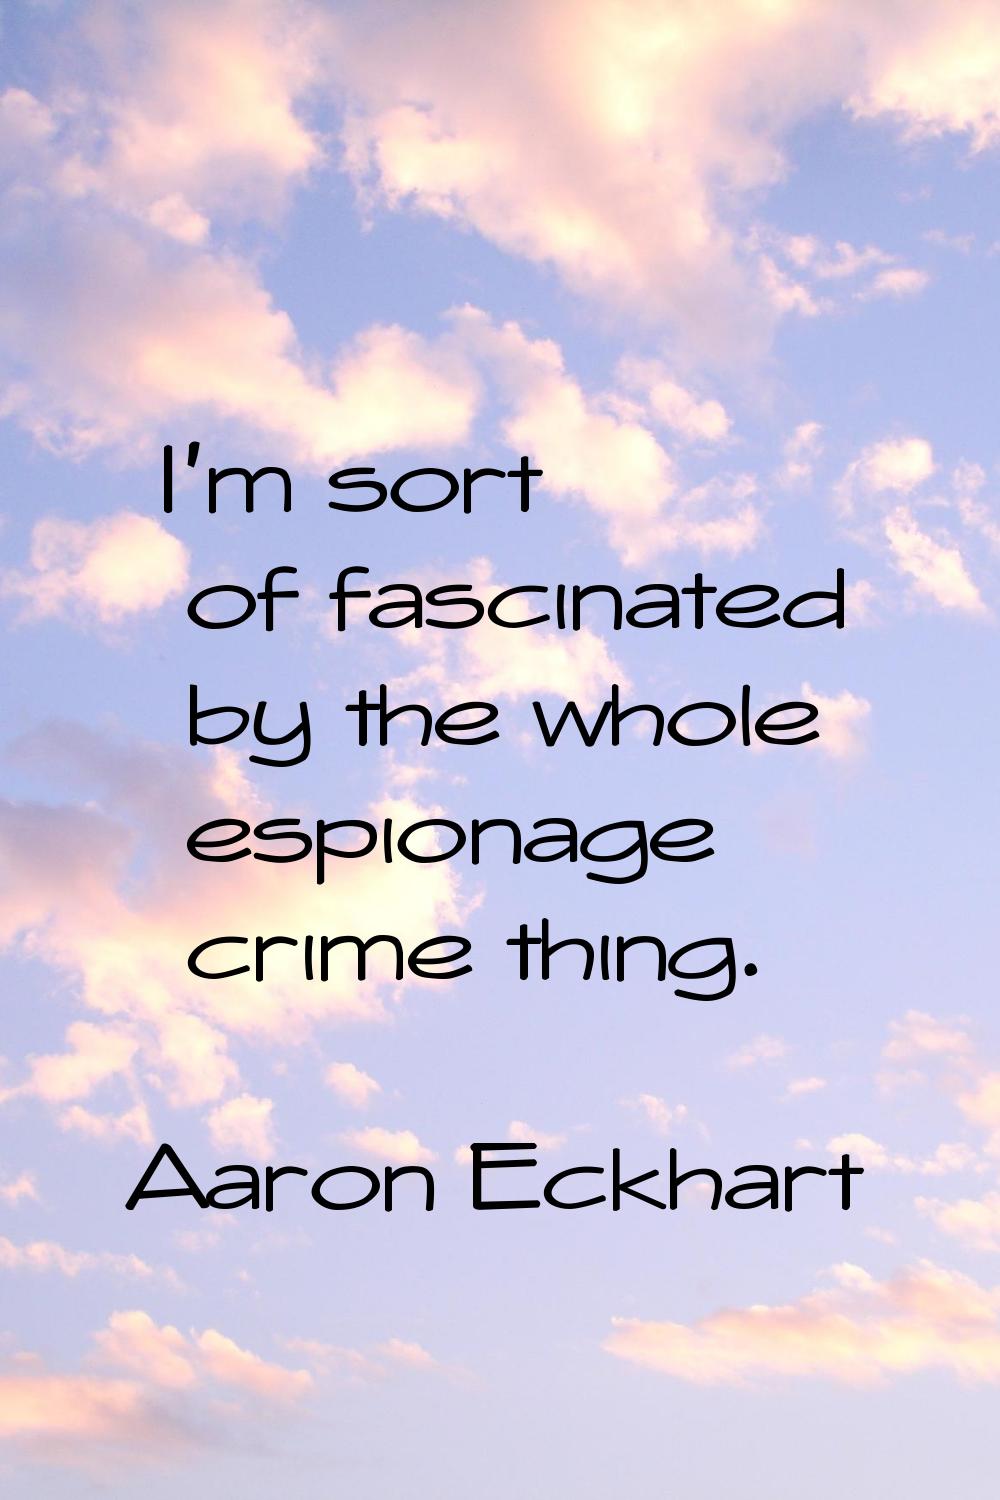 I'm sort of fascinated by the whole espionage crime thing.